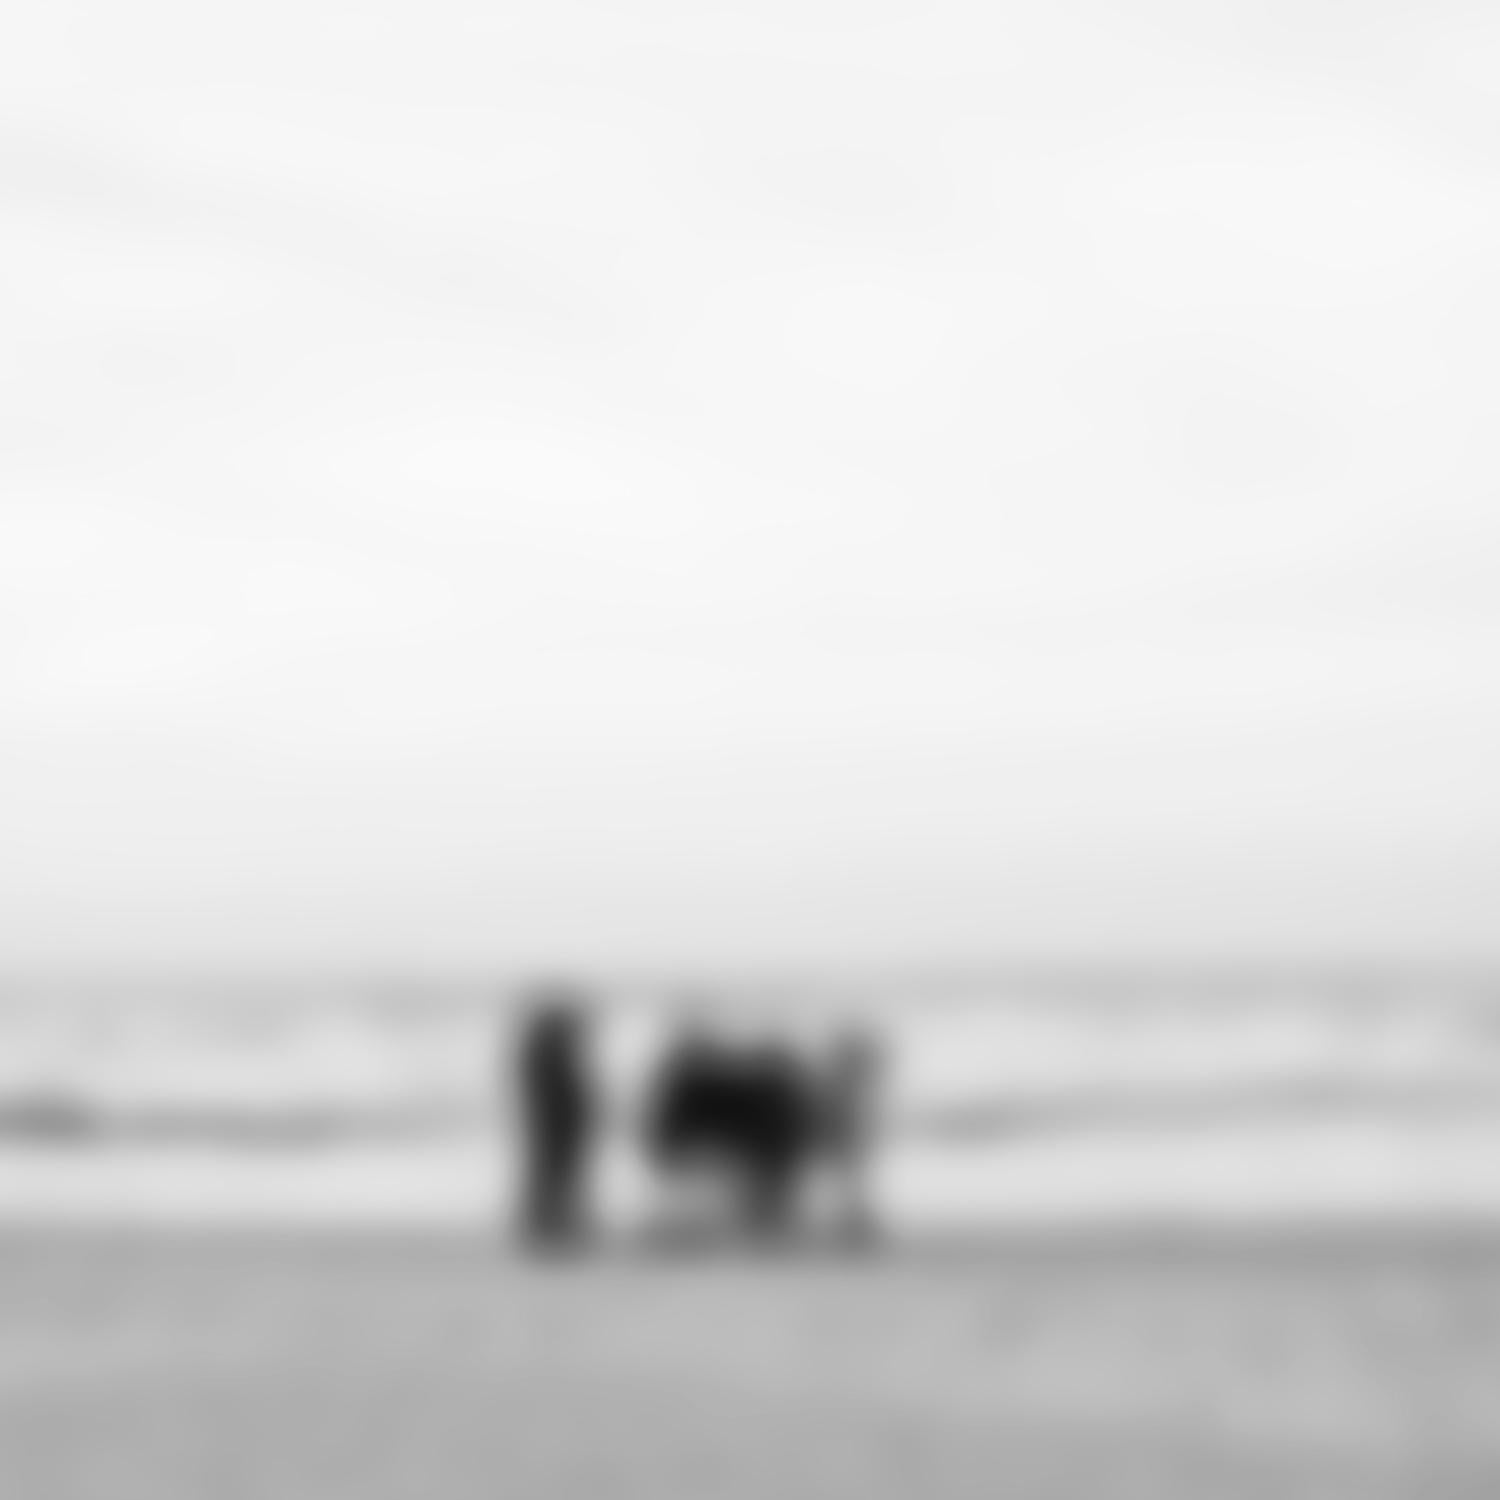 People on the Beach - contemporary abstract photography of beach life and sea - Photograph by Michael Götze